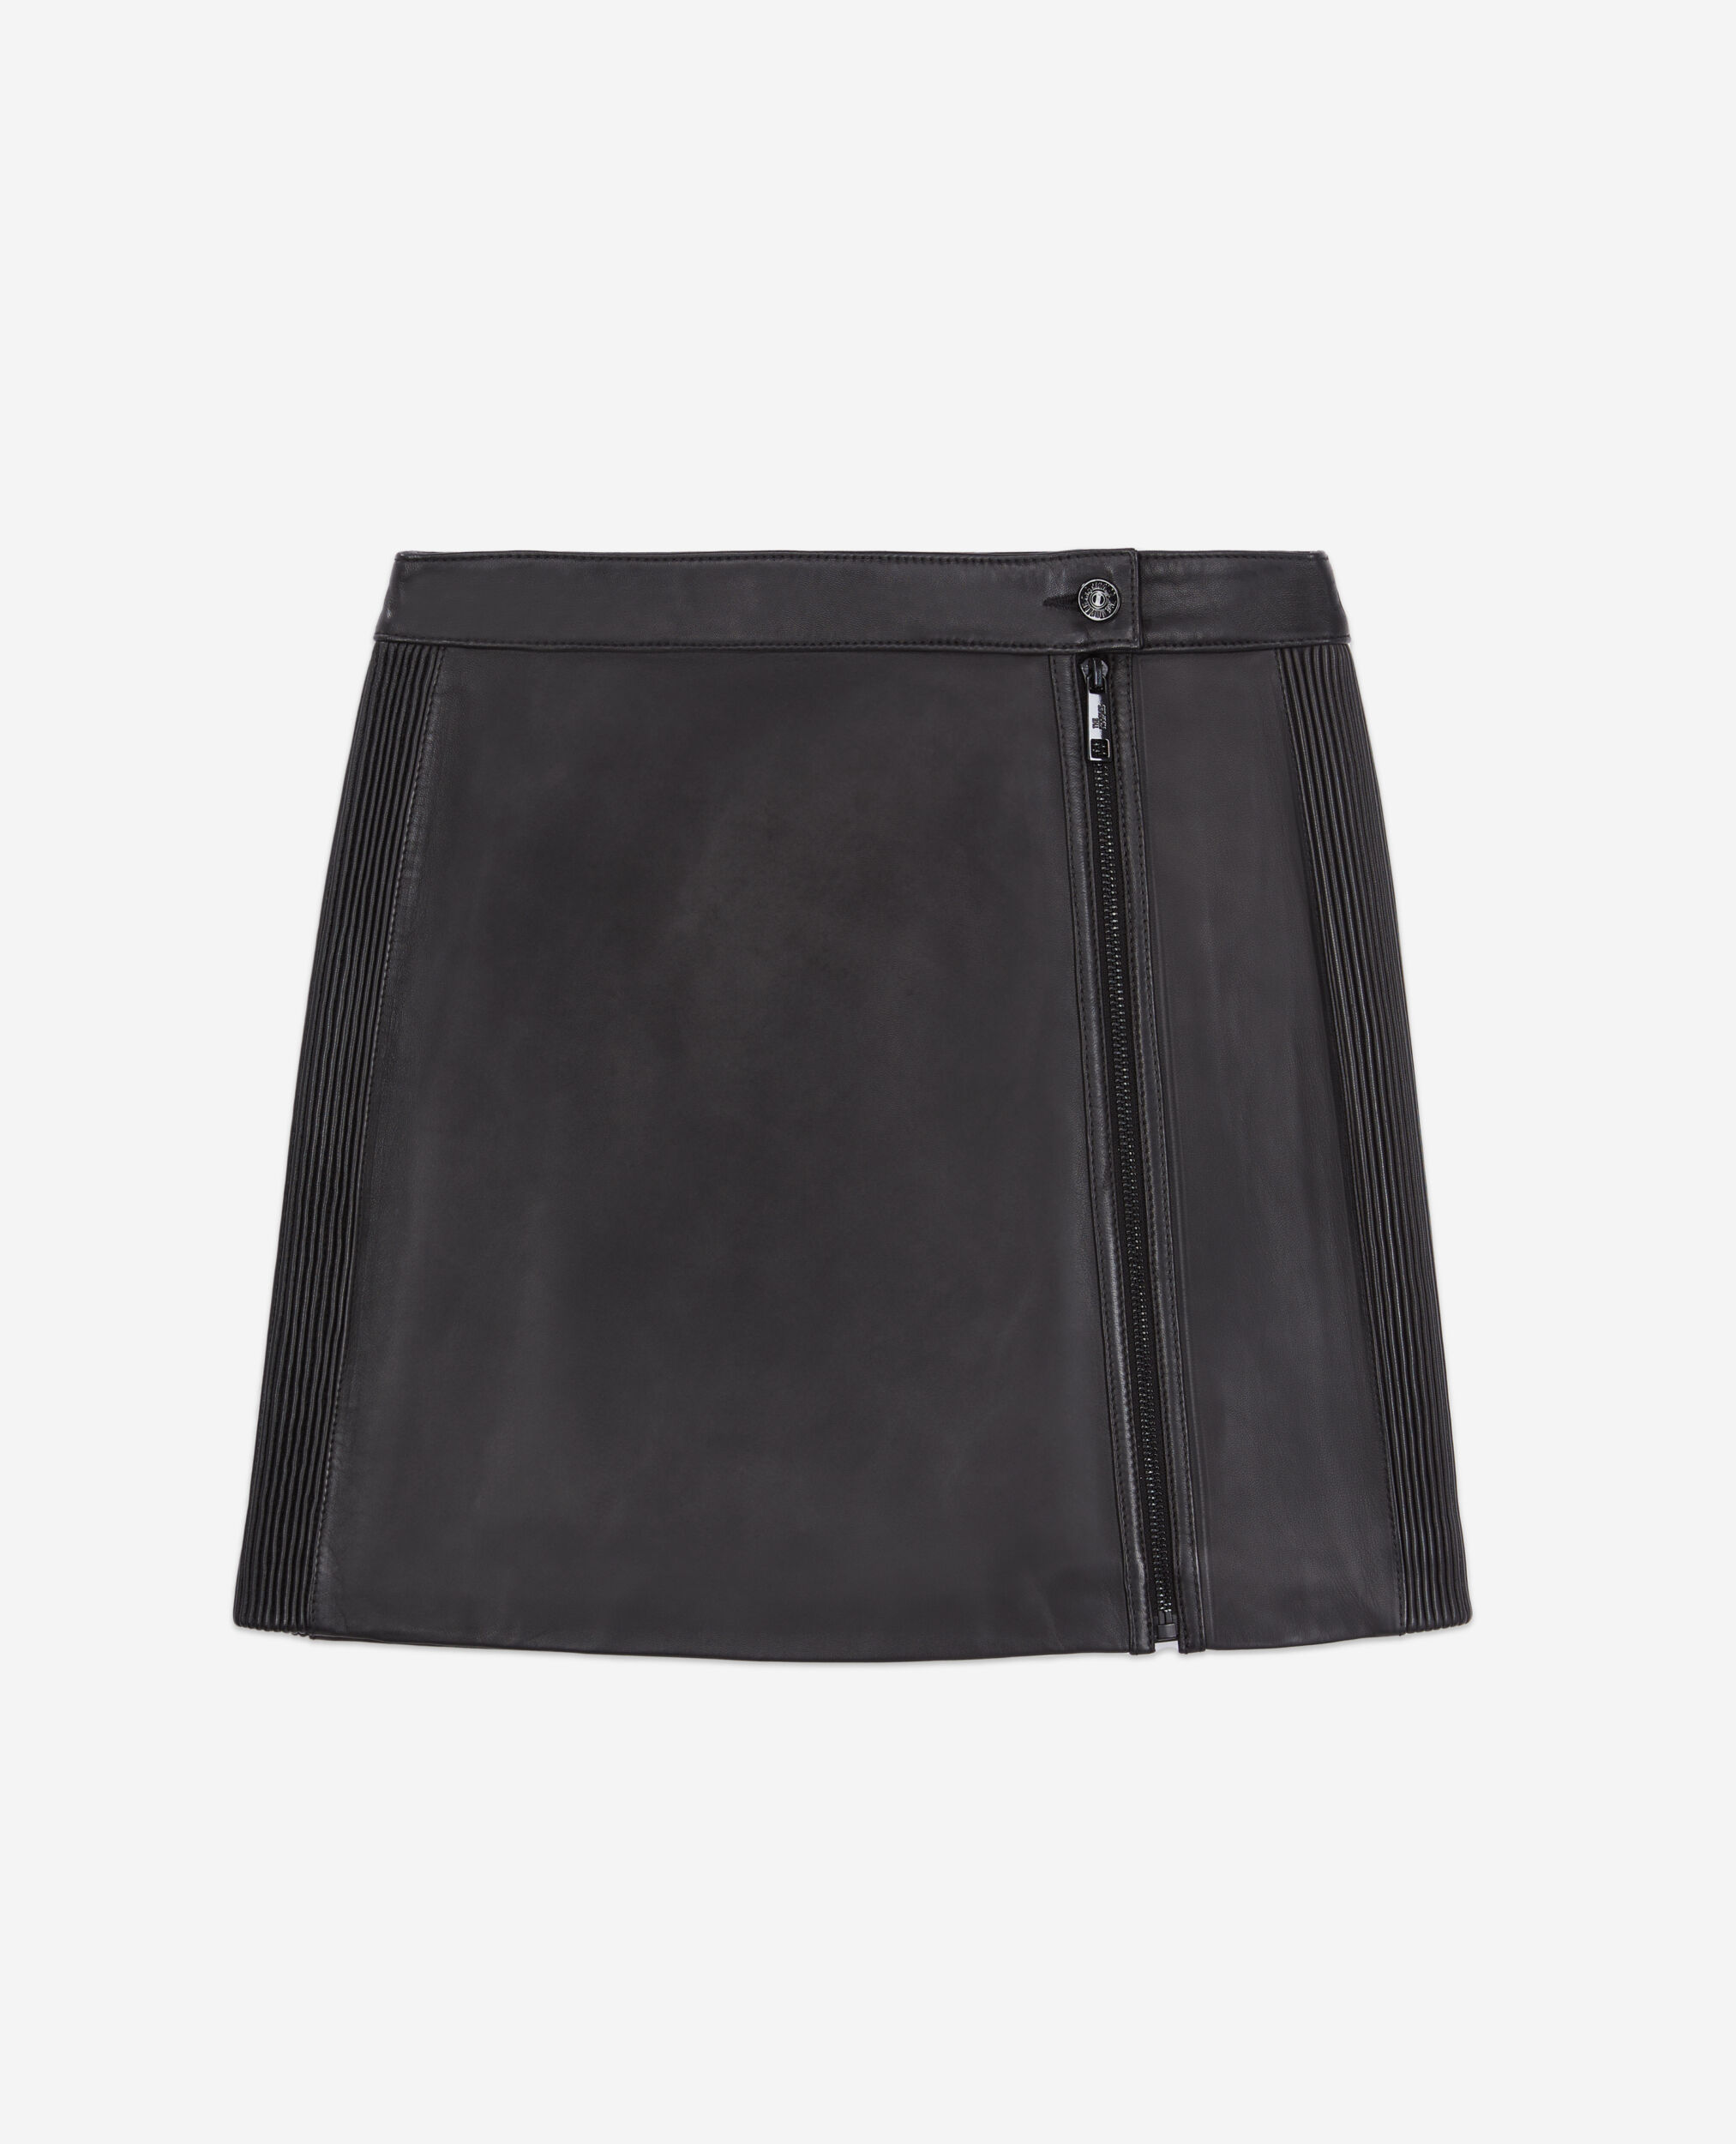 Short black leather skirt with zip and pintuck details, BLACK, hi-res image number null